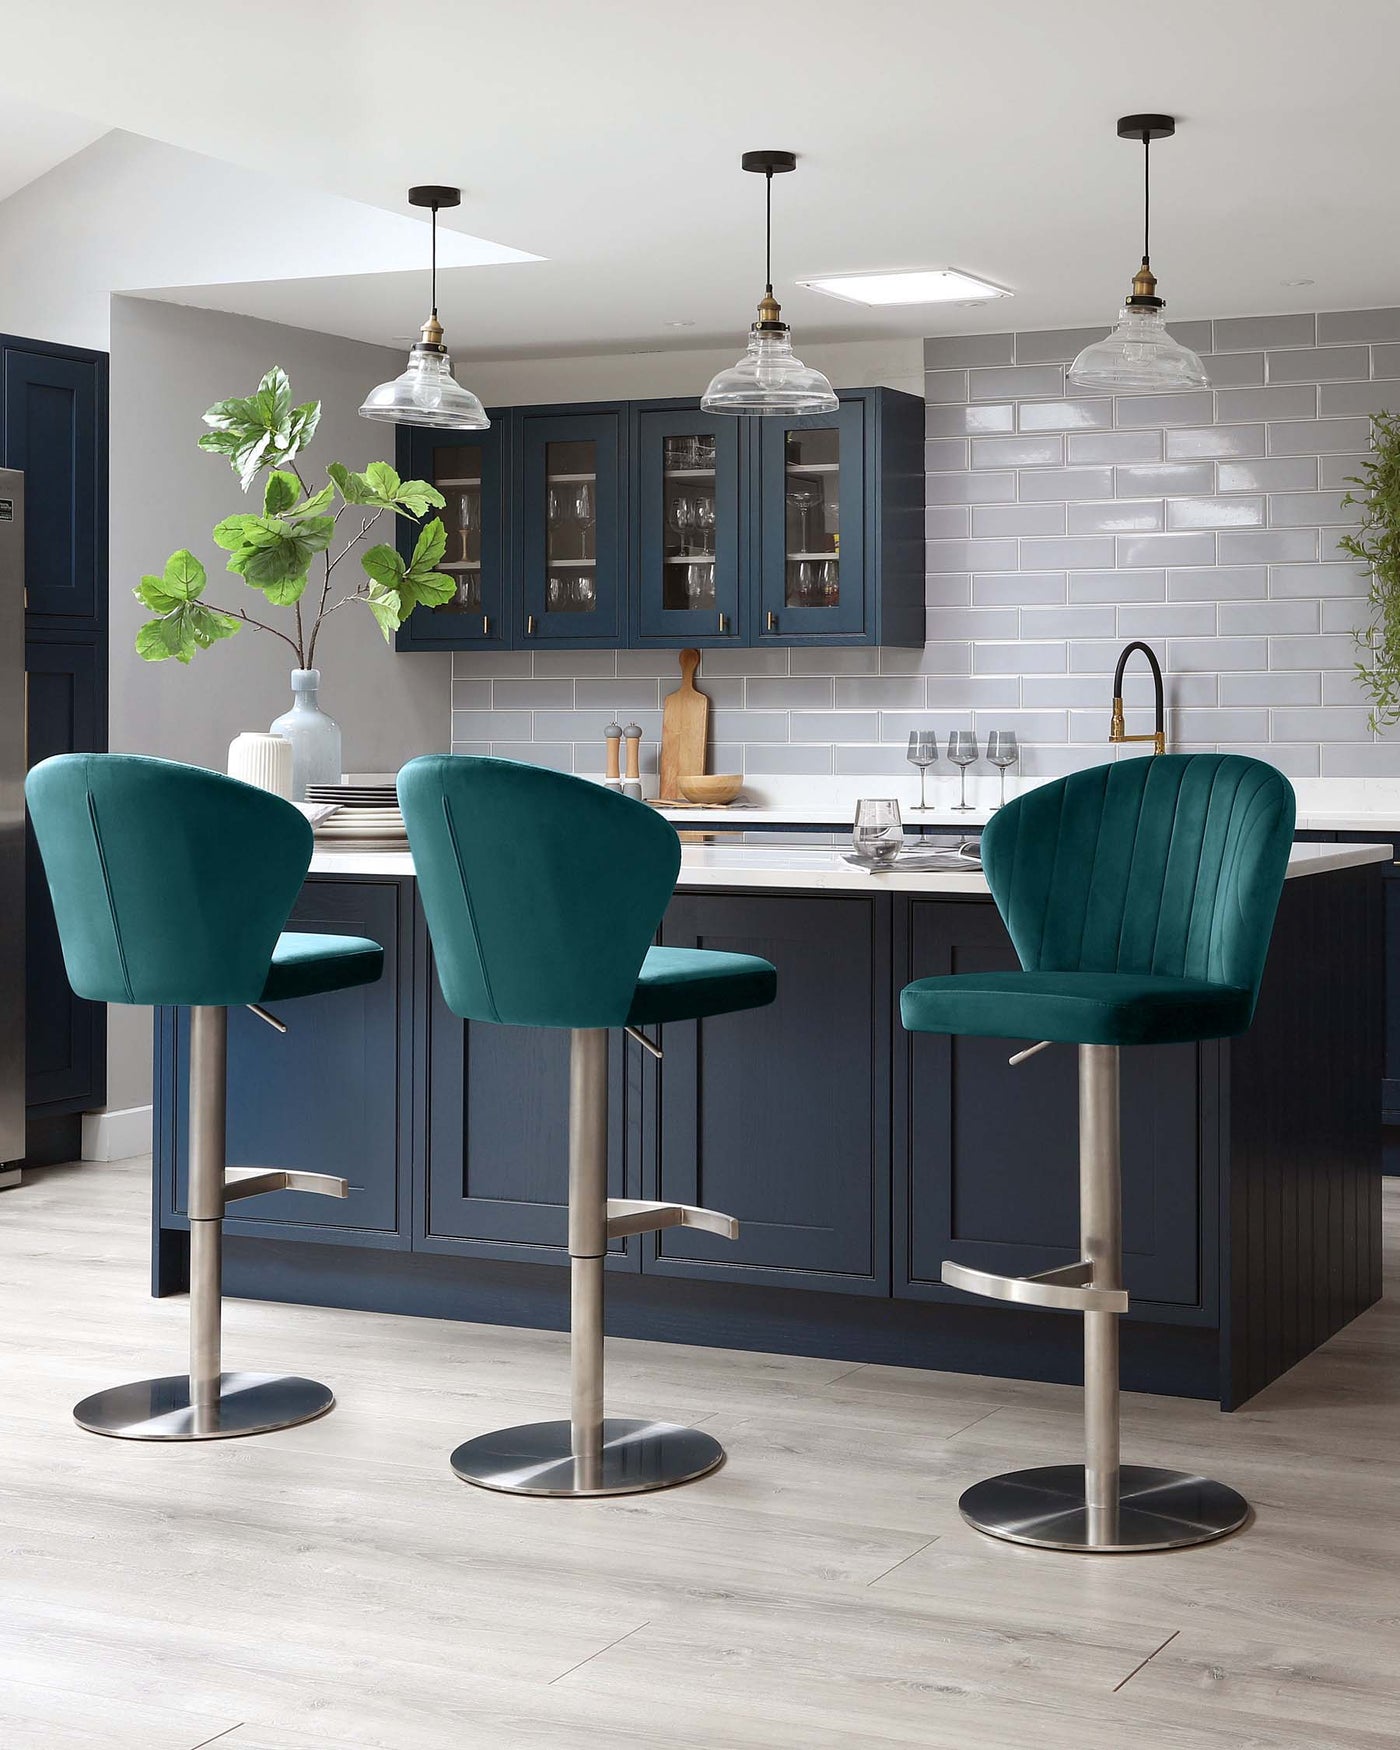 Three modern teal velvet bar stools with low backs and sleek metallic bases positioned around a kitchen island with navy cabinetry and white countertops.